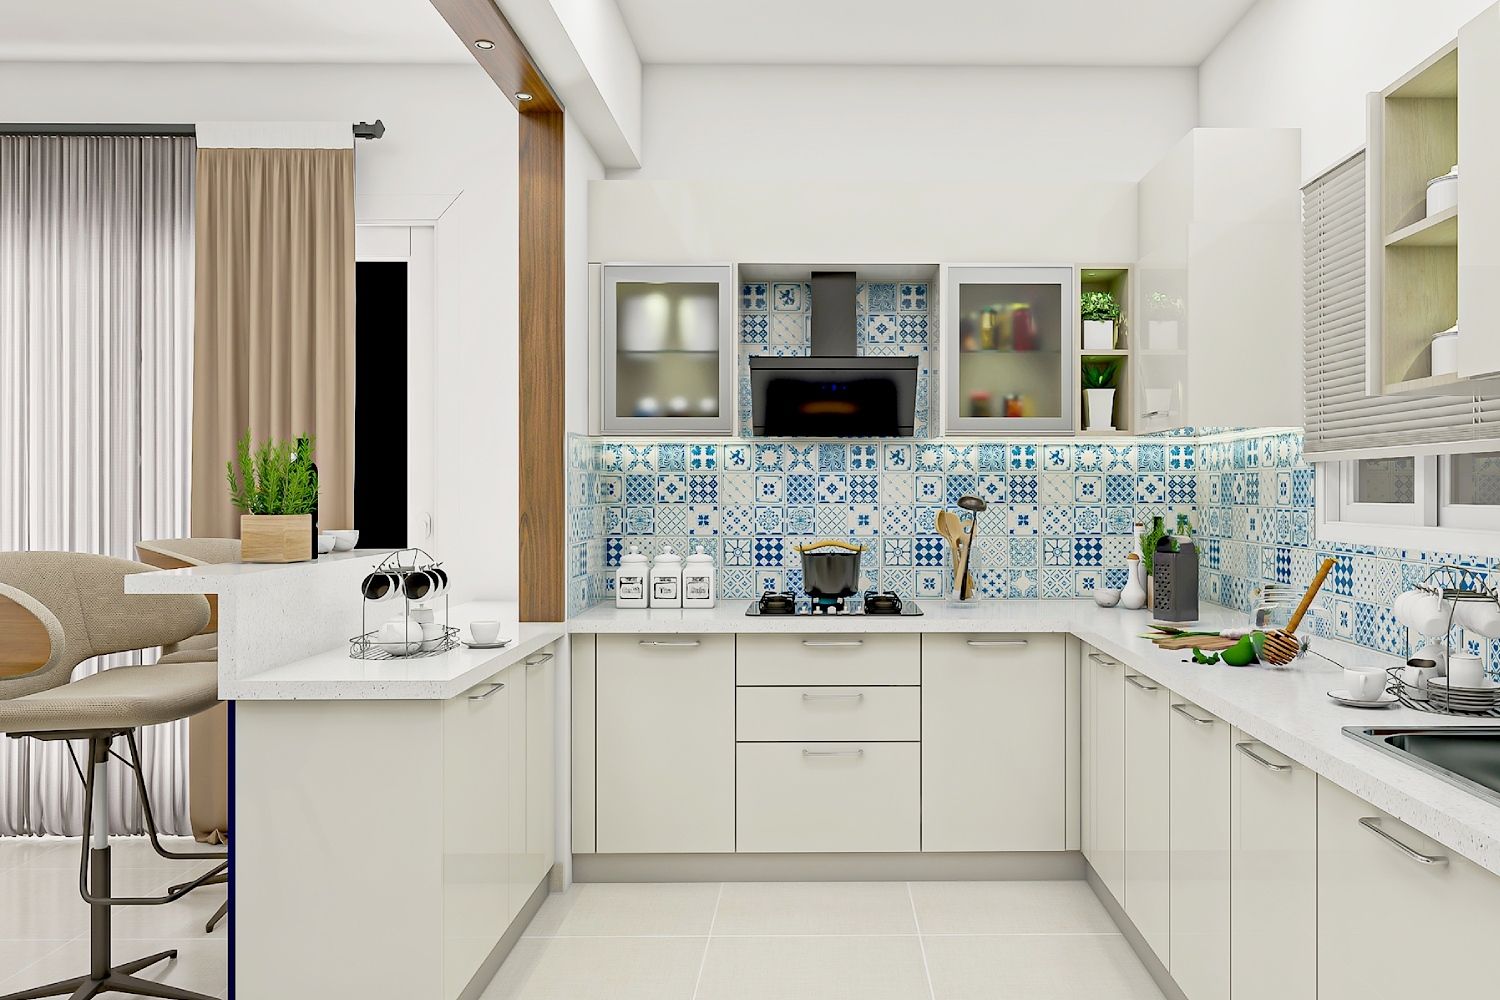 Contemporary Open Modular Frosty White Kitchen Design with High Gloss Finish